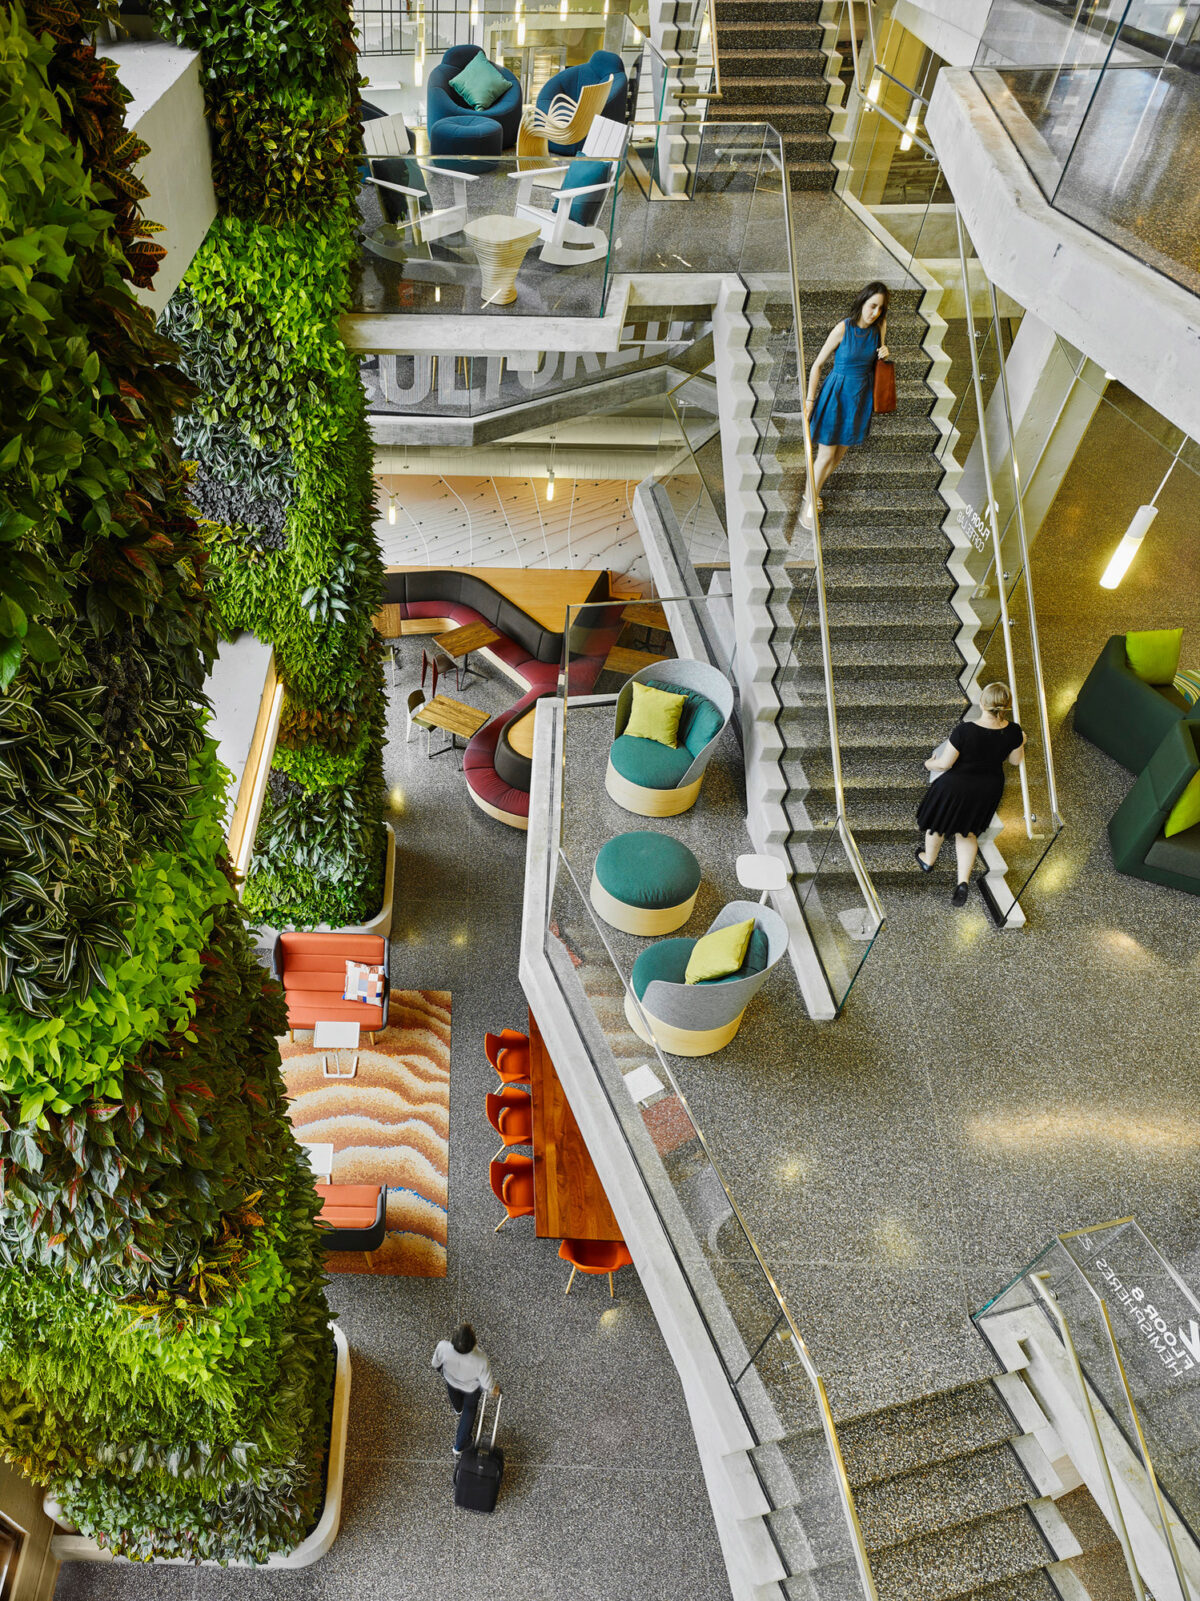 Elevated view of a vibrant multi-level office interior featuring a central spiral staircase with sleek white steps. A vertical garden lines one wall, contributing to the biophilic design. Contemporary furniture in complementary blues and greens pop against the warm wooden flooring and coral upholstered bench seating.